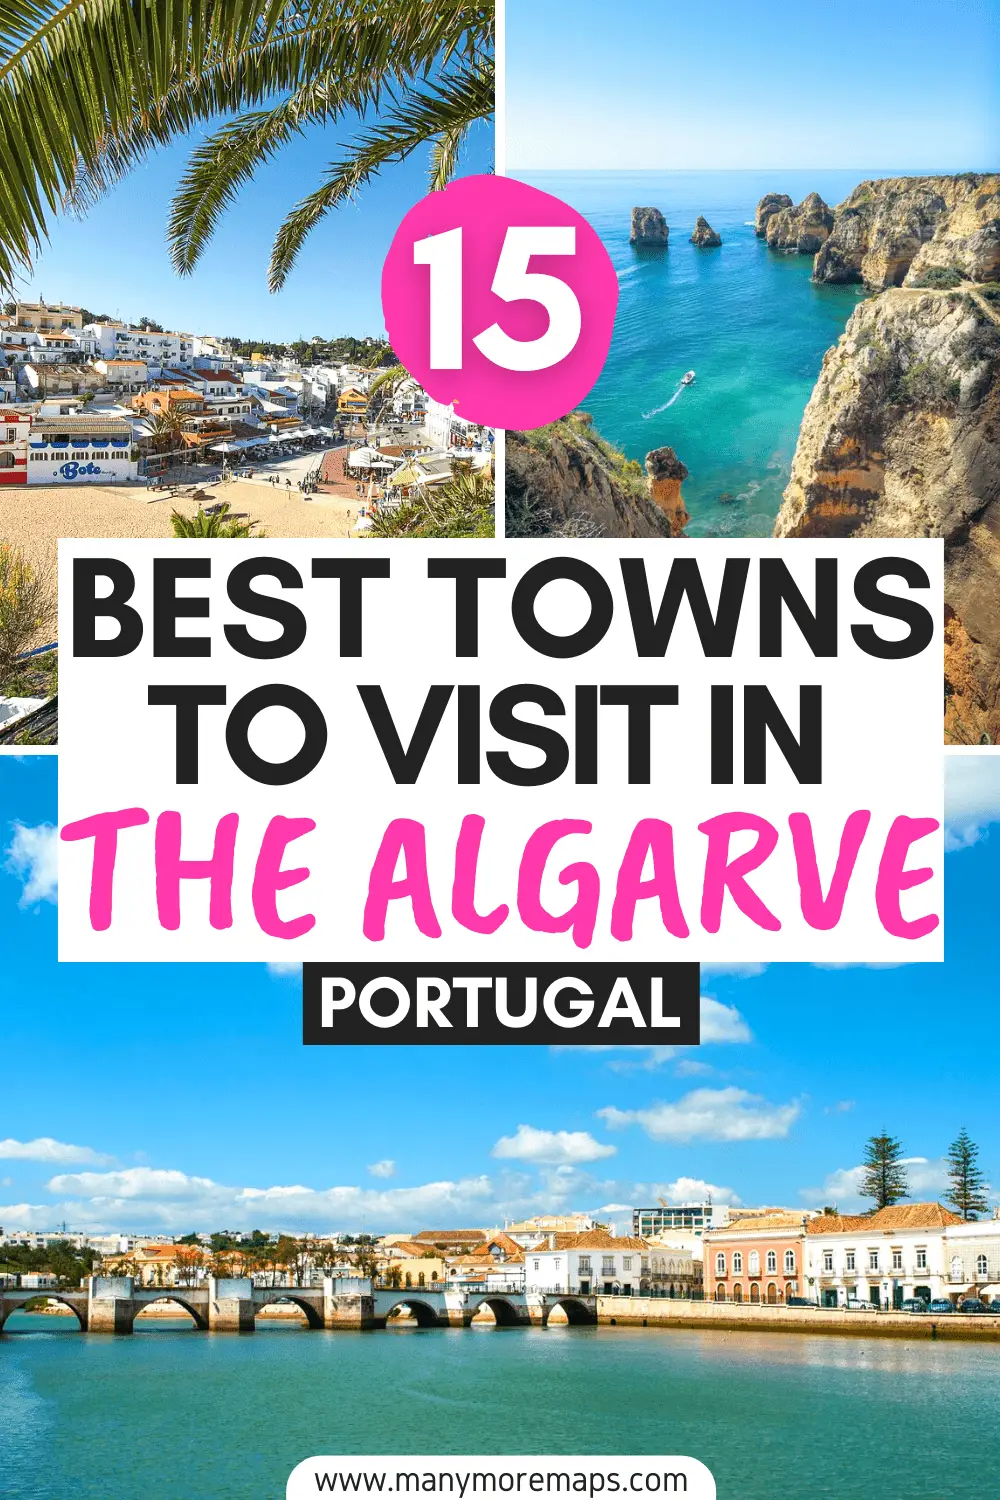 For the very best beaches, surfing and towns in Portugal, you have to travel to the Algarve! There are tons of things to do and places to see here, as well as the amazing Benagil Cave, so check out this travel guide to the 15 best towns in the Algarve and get planning your next trip!